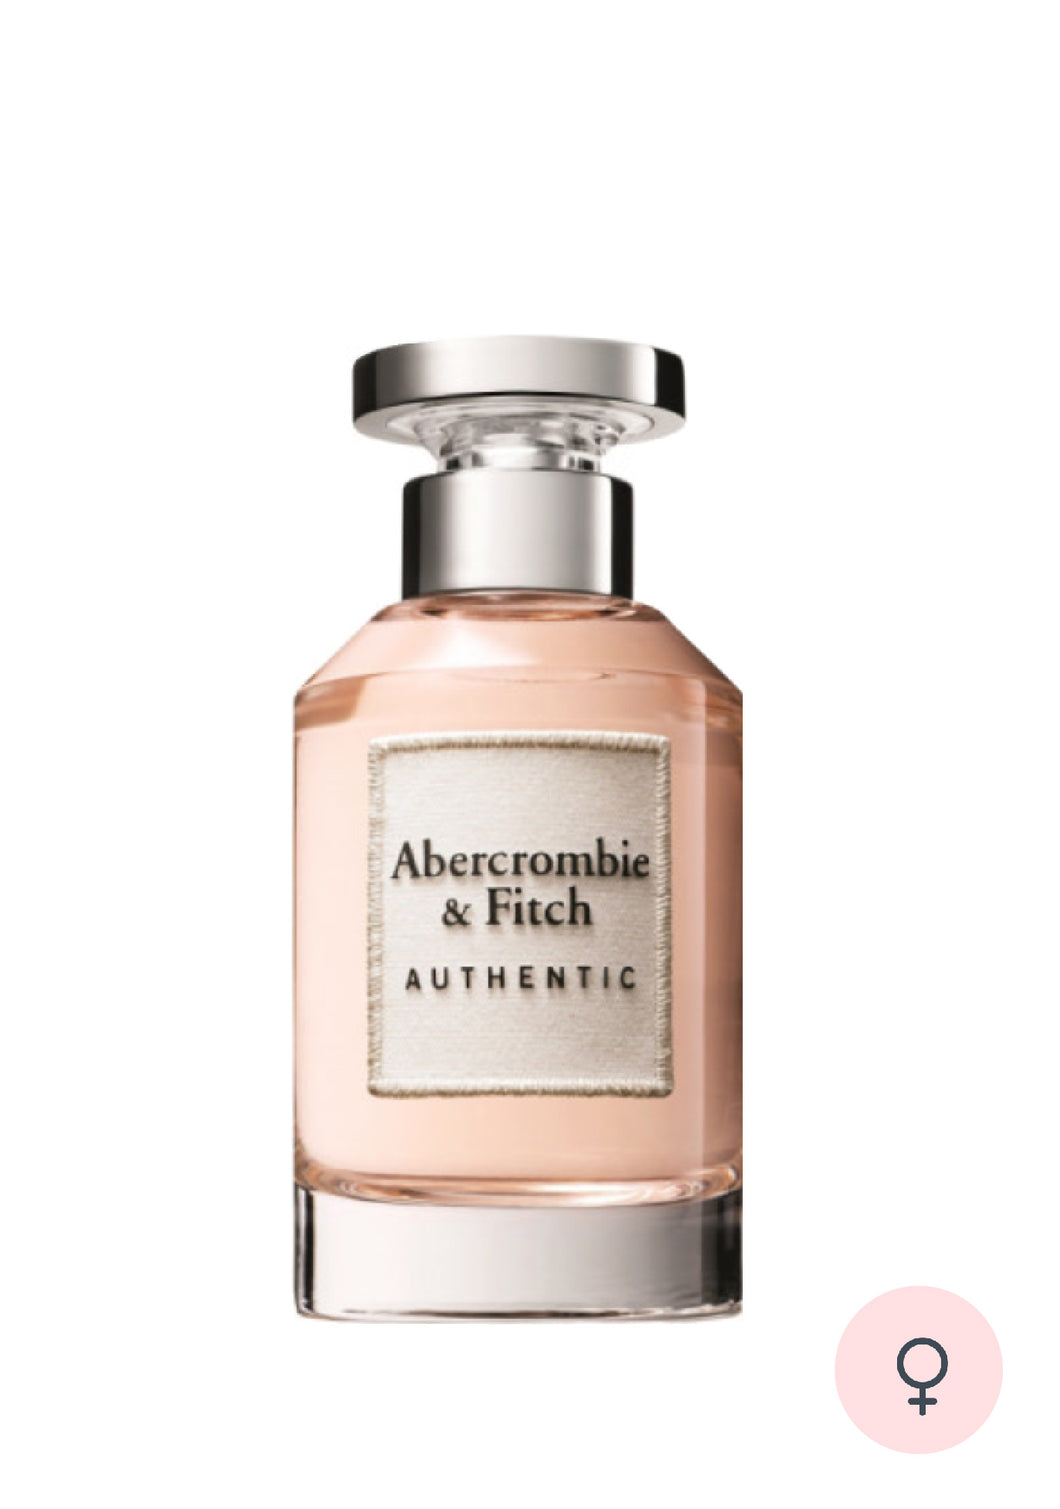 Abercrombie & Fitch Authentic EDP